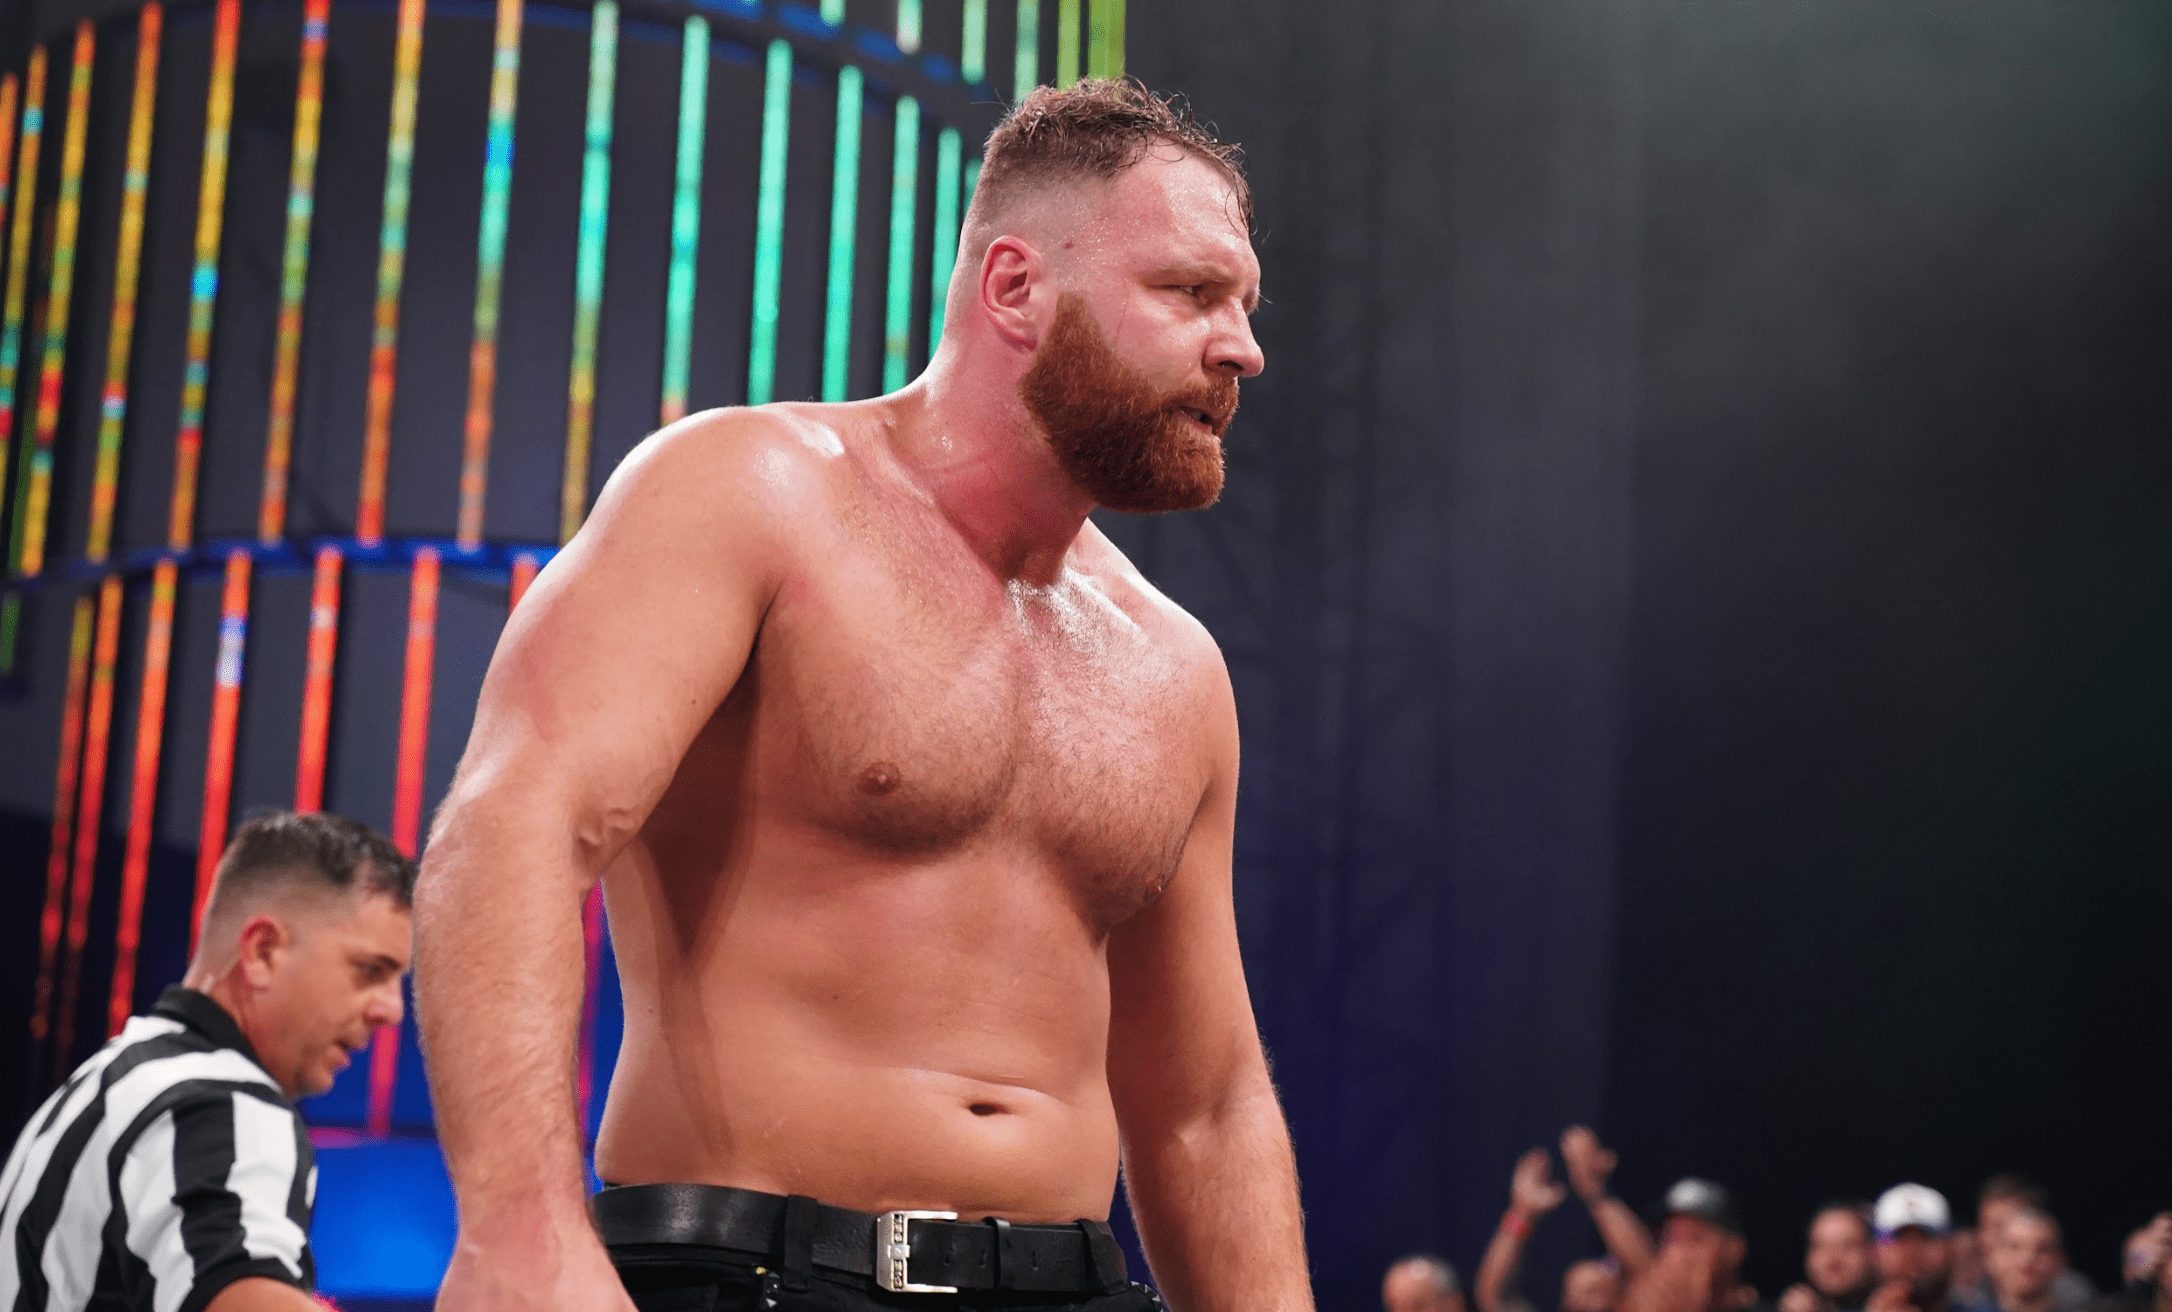 Jon Moxley Calls Current AEW Star "The Greatest Wrestler That Ever Liv...